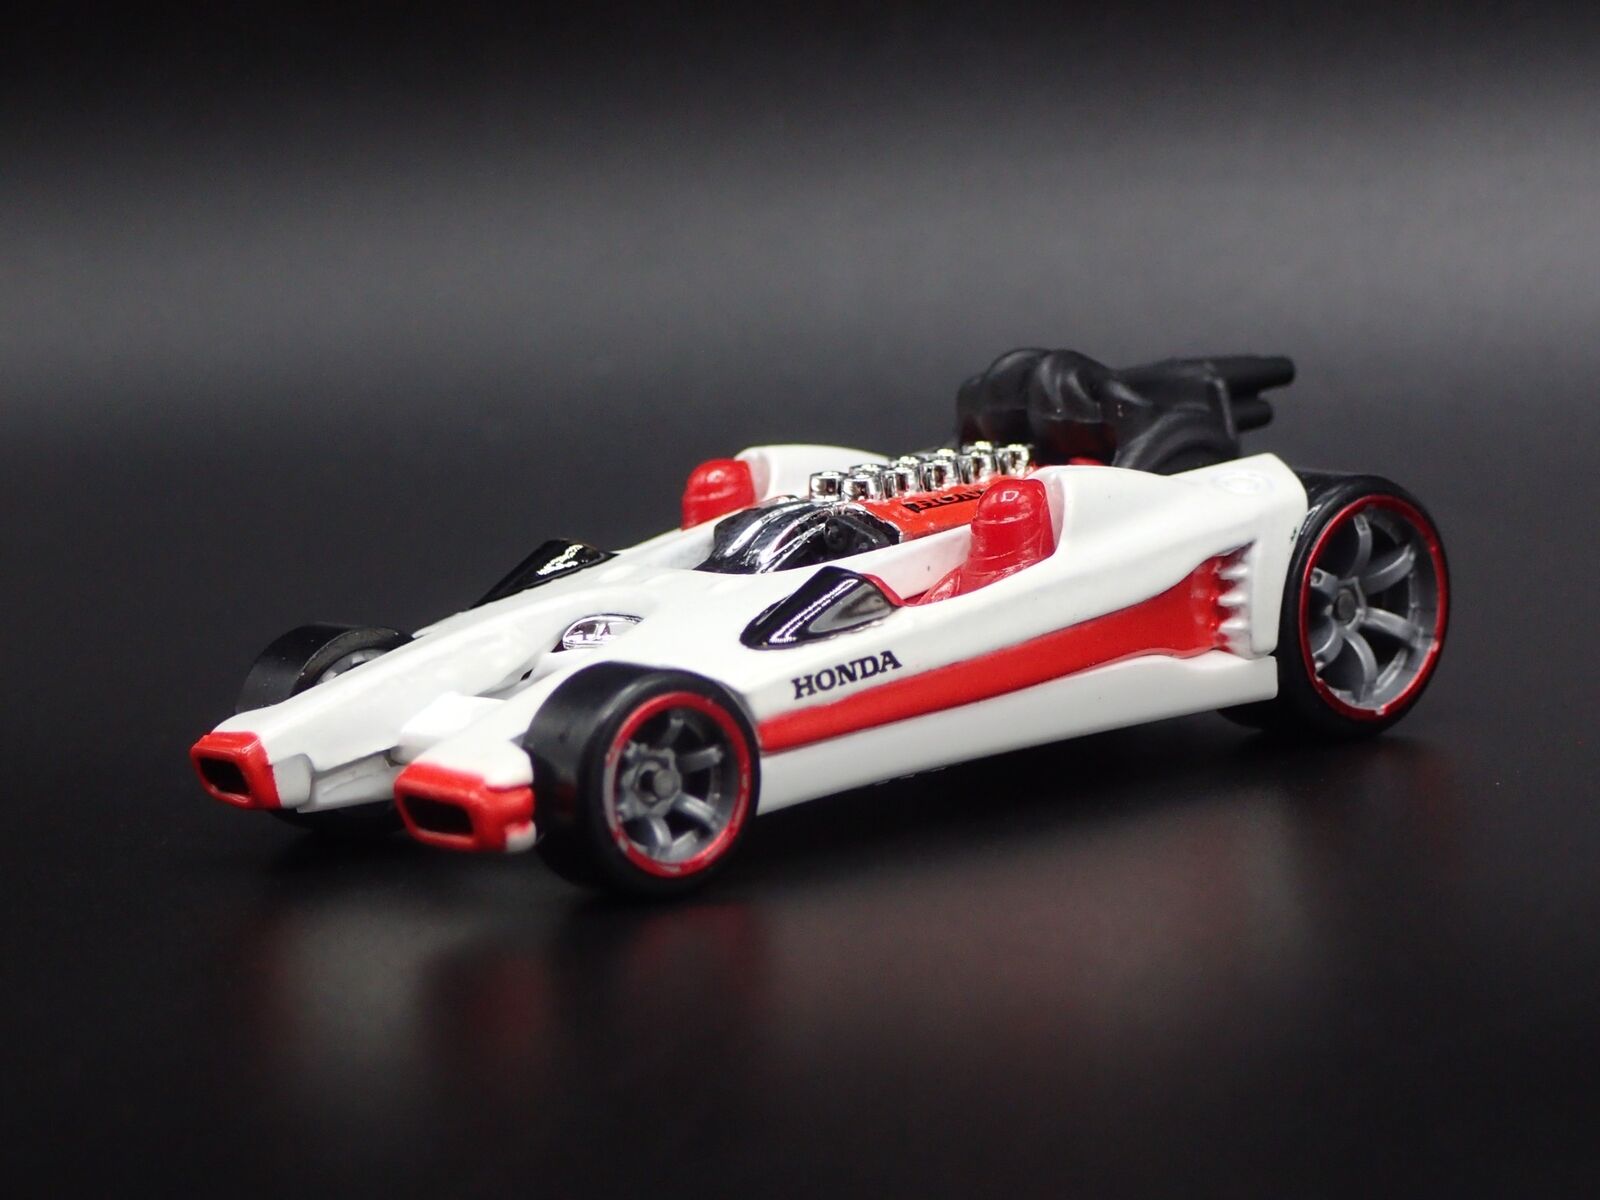 2007 07 HONDA RACER CONCEPT CAR 1/64 SCALE COLLECTIBLE DIORAMA DIECAST relisted